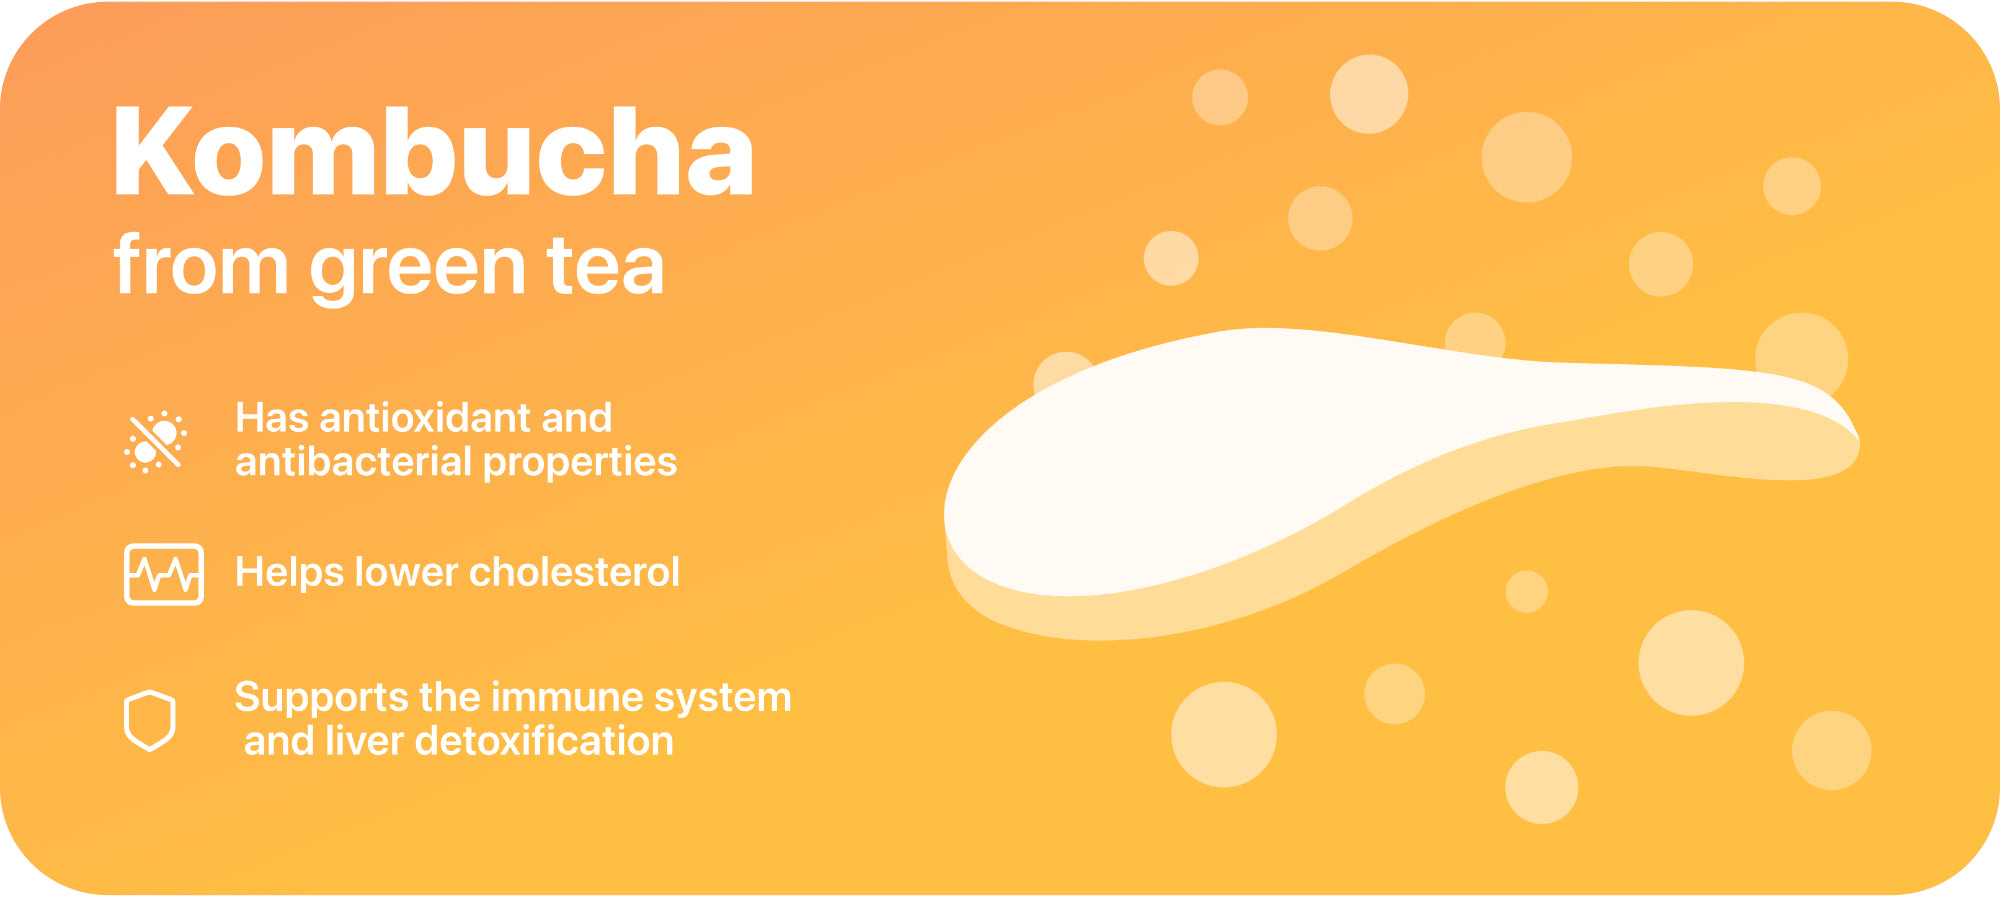 The new ManaPowder Mark 8 contains kombucha for a strong immune system.